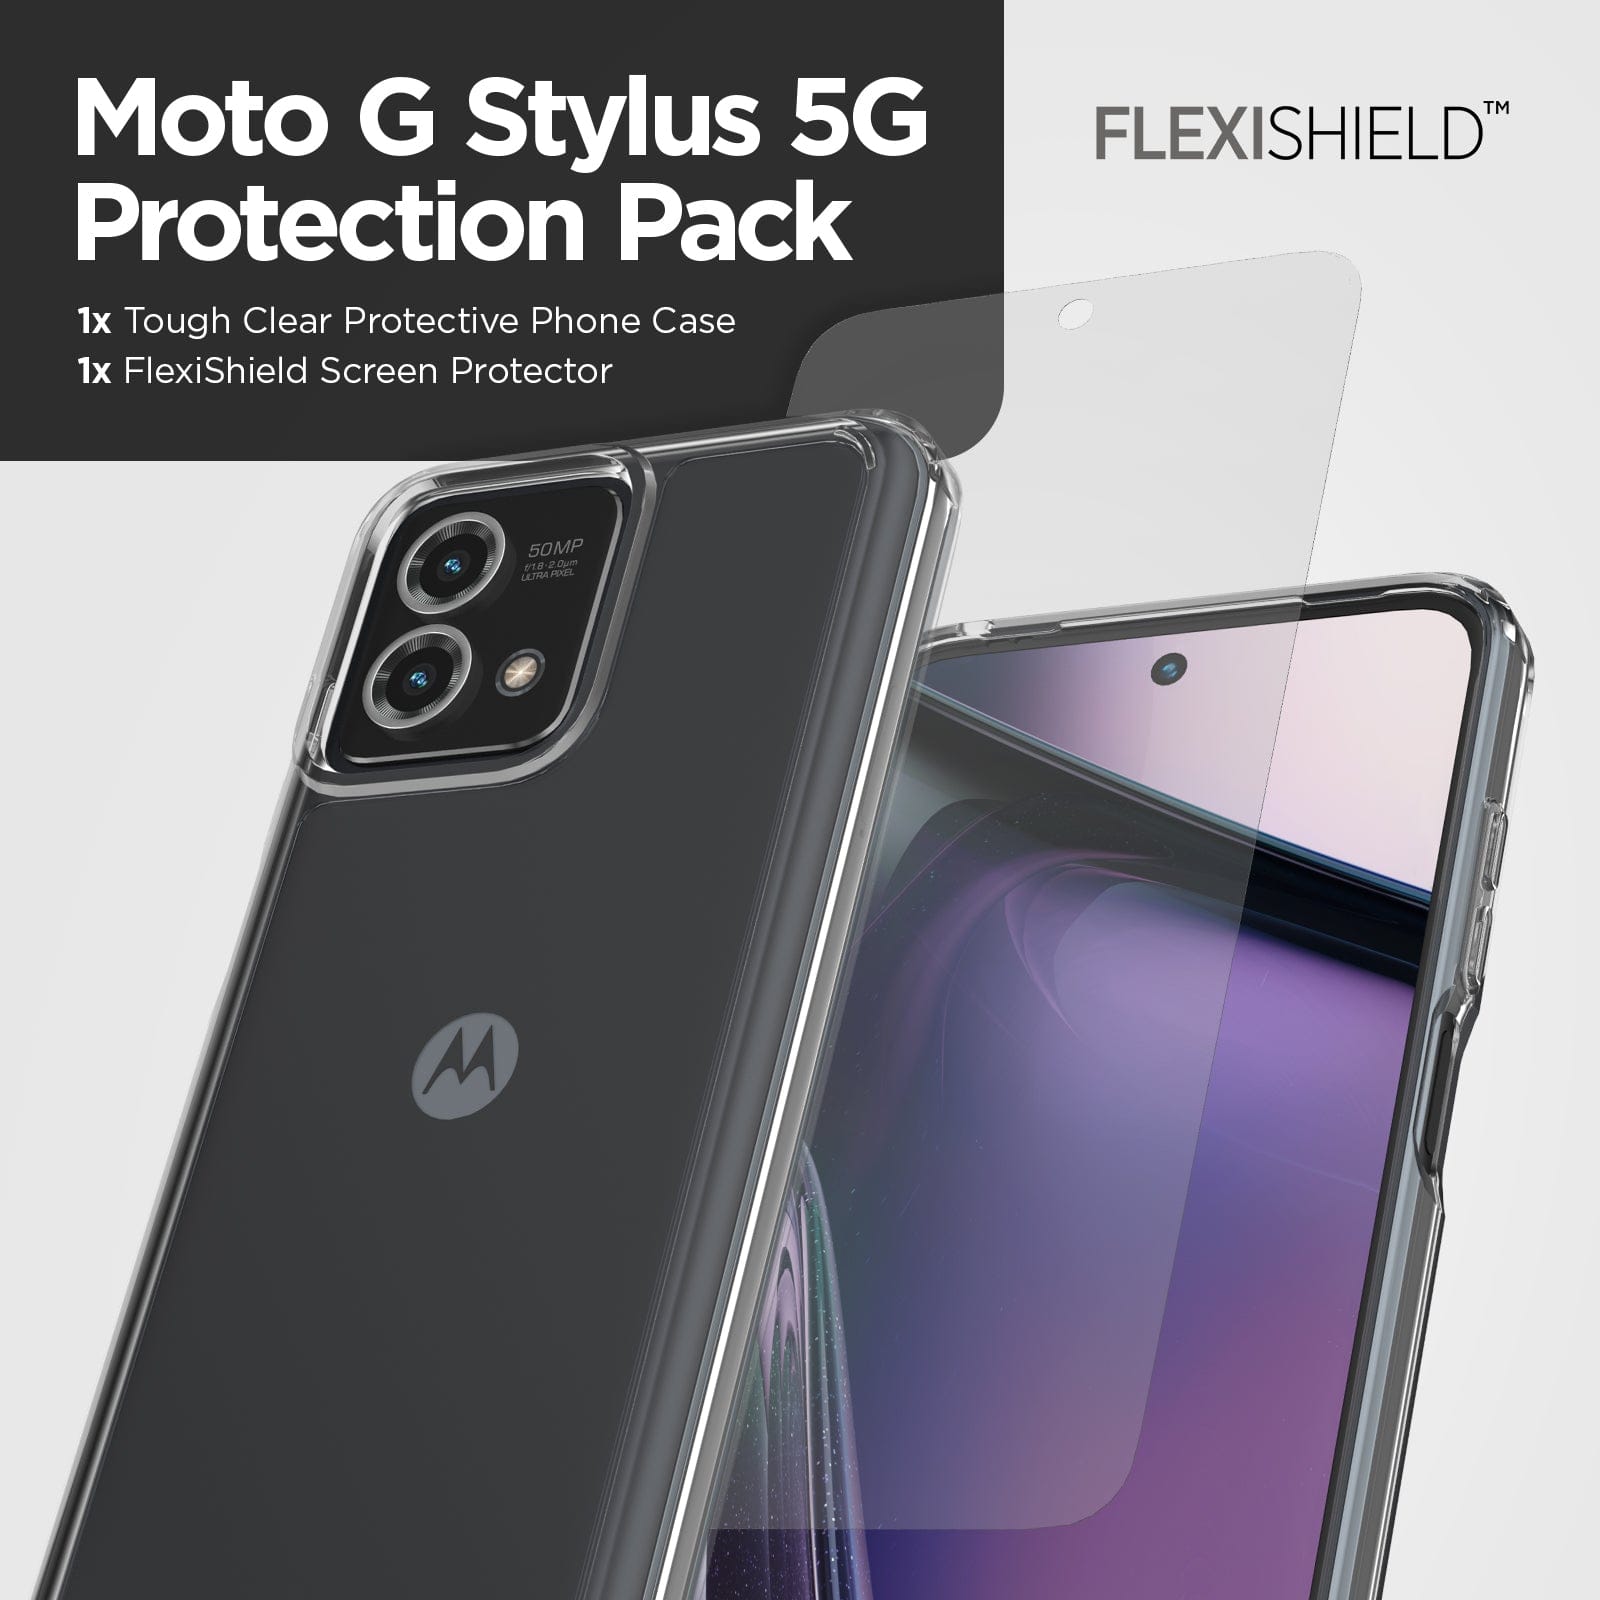 Moto G Stylus 5G Protection Pack. 1x Tough Clear Protective Phone Case, 1x Flexishield Screen Protector